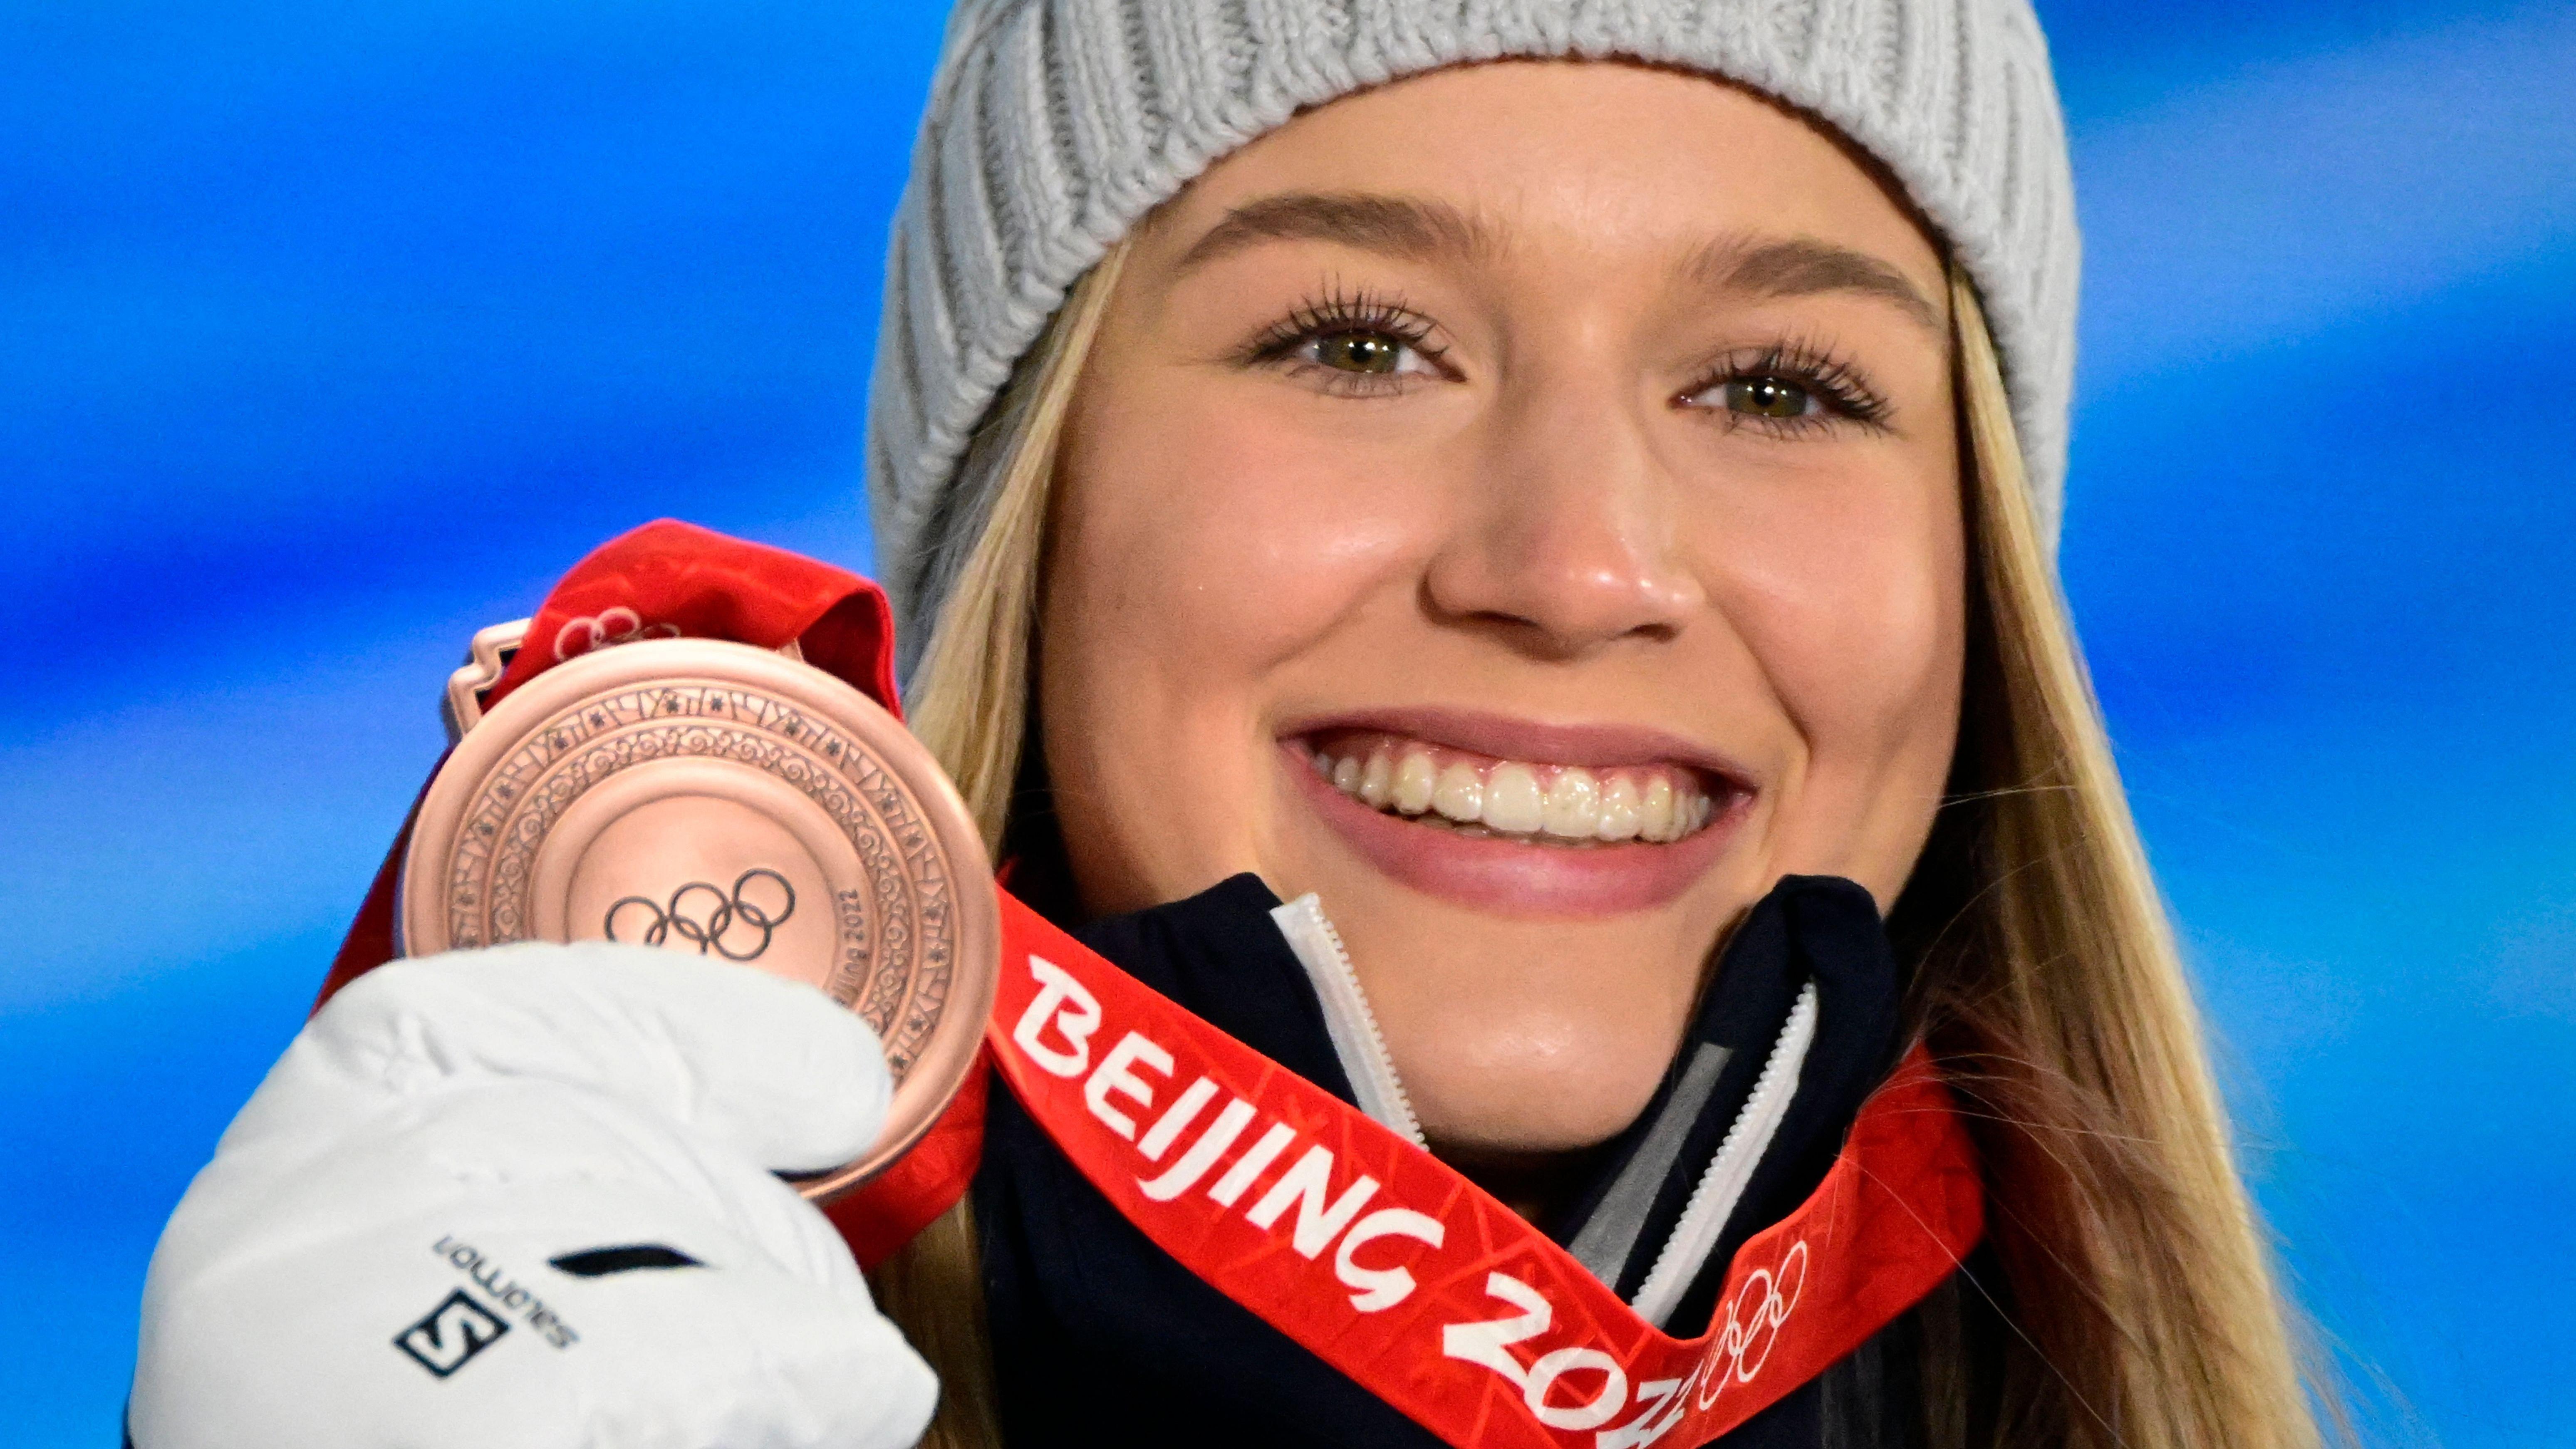 Kelly Sildaru wearing a beanie and holding up her Olympic bronze medal.